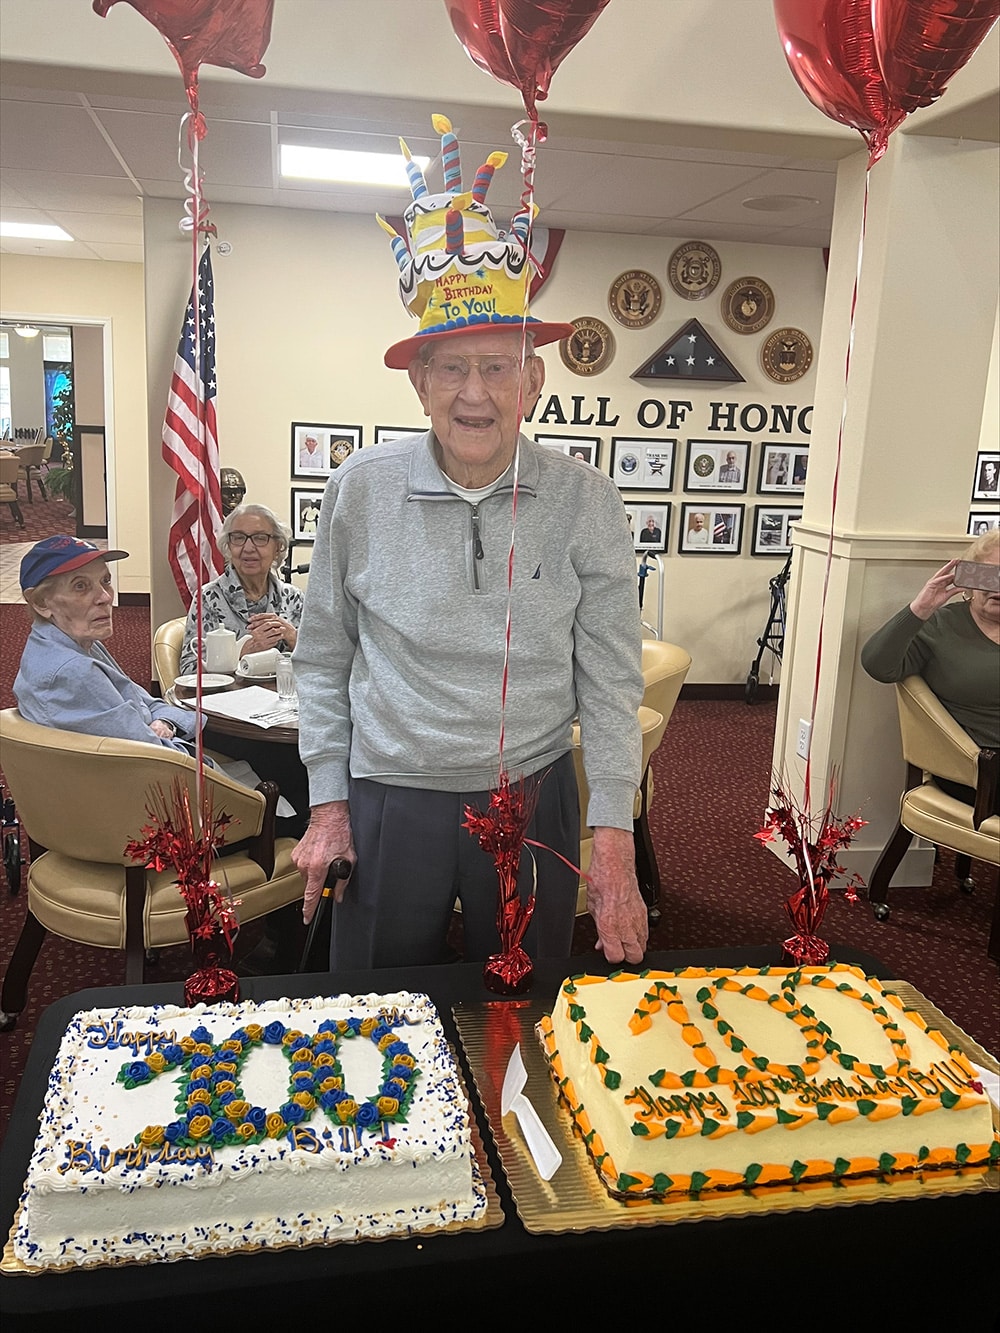 Bill celebrated his 100th birthday in Lawrenceville with TWO birthday cakes from his many friends.